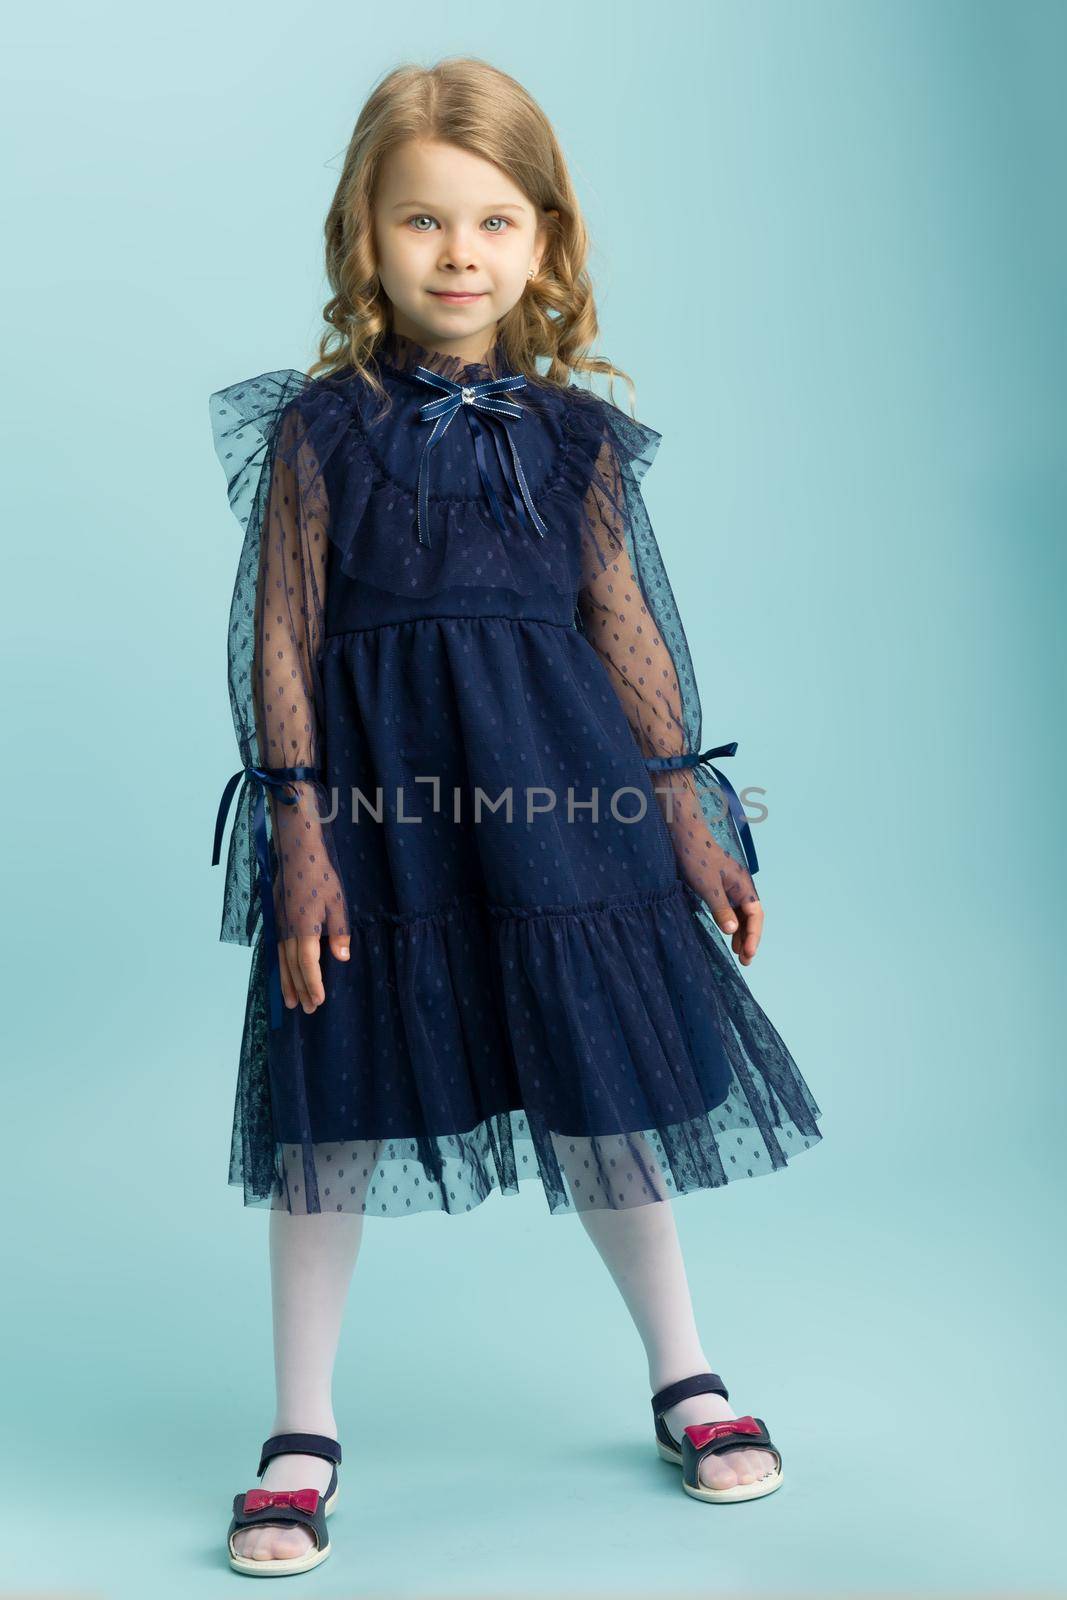 Lovely little girl posing in beautiful blue dress. Full length portrait of adorable blonde girl with curly hairstyle wearing nice lace dress standing on light blue background in studio.